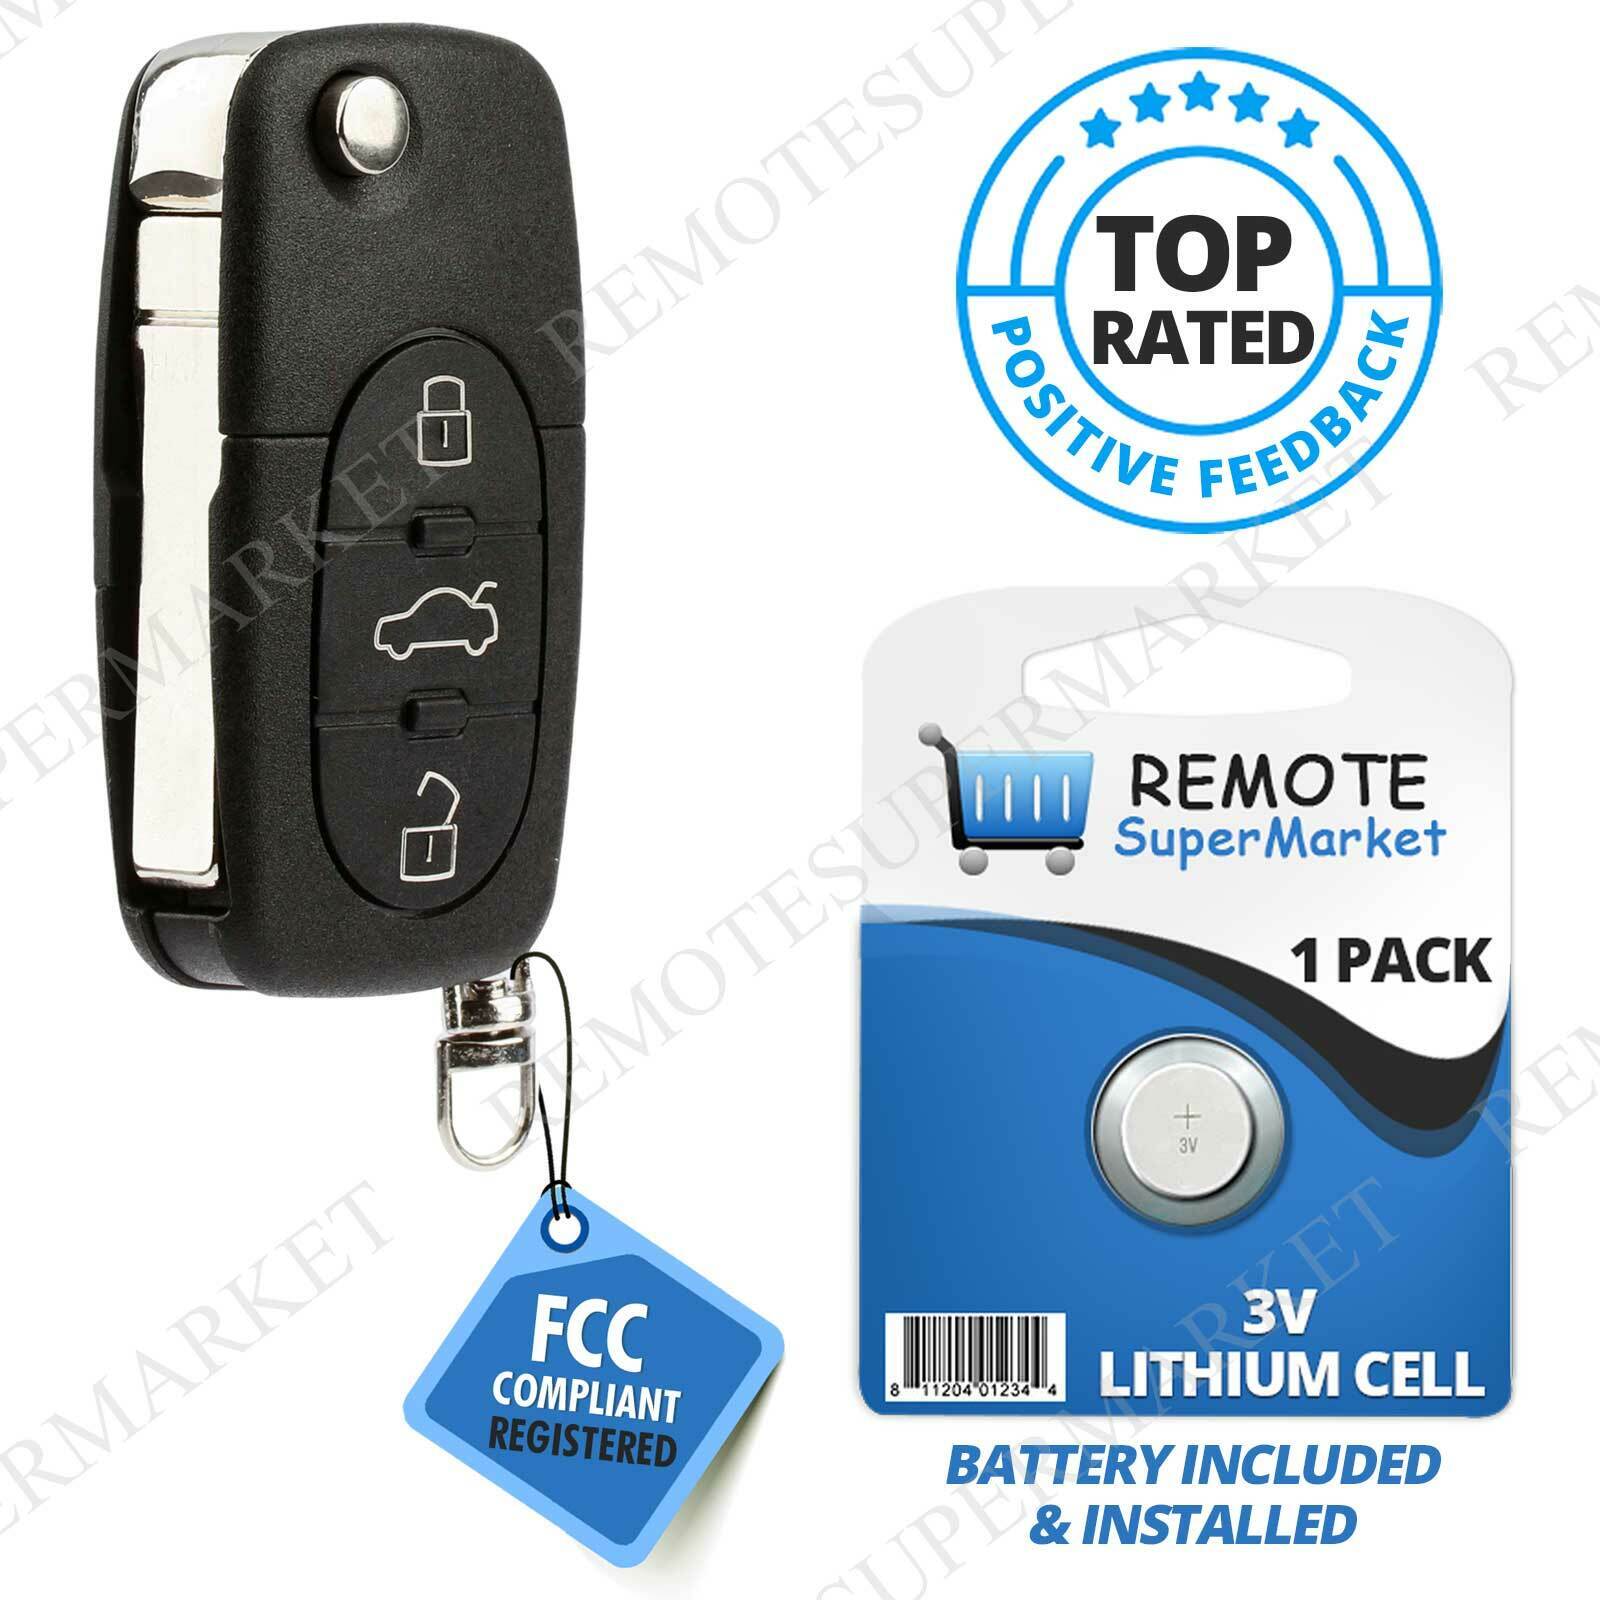 Replacement for Audi A4 A6 A8 Allroad Quattro Remote Car Keyless Entry Key Fob